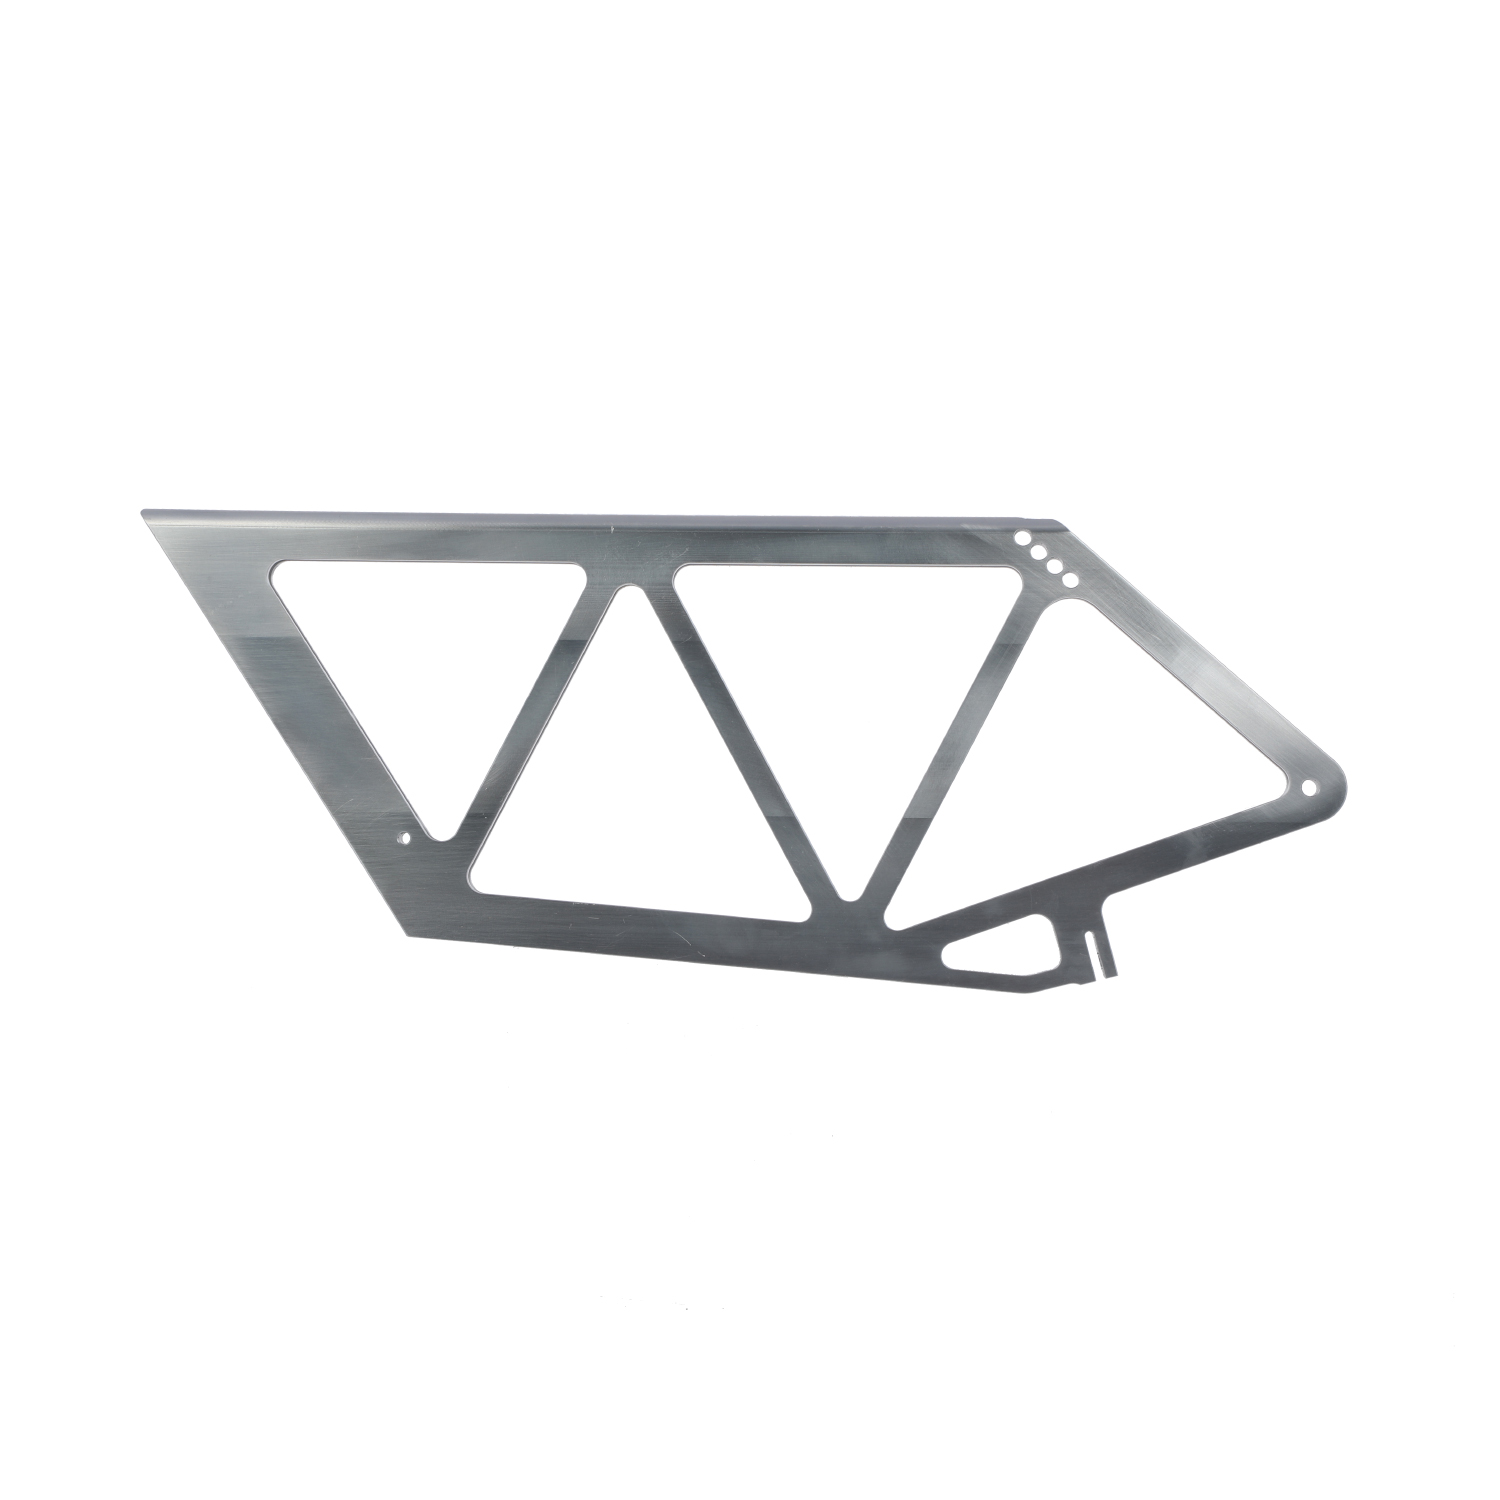 Made in China High Quality Mount Bracket 5 Axis Cnc Machining Milling Nonstandard Aluminum Brackets